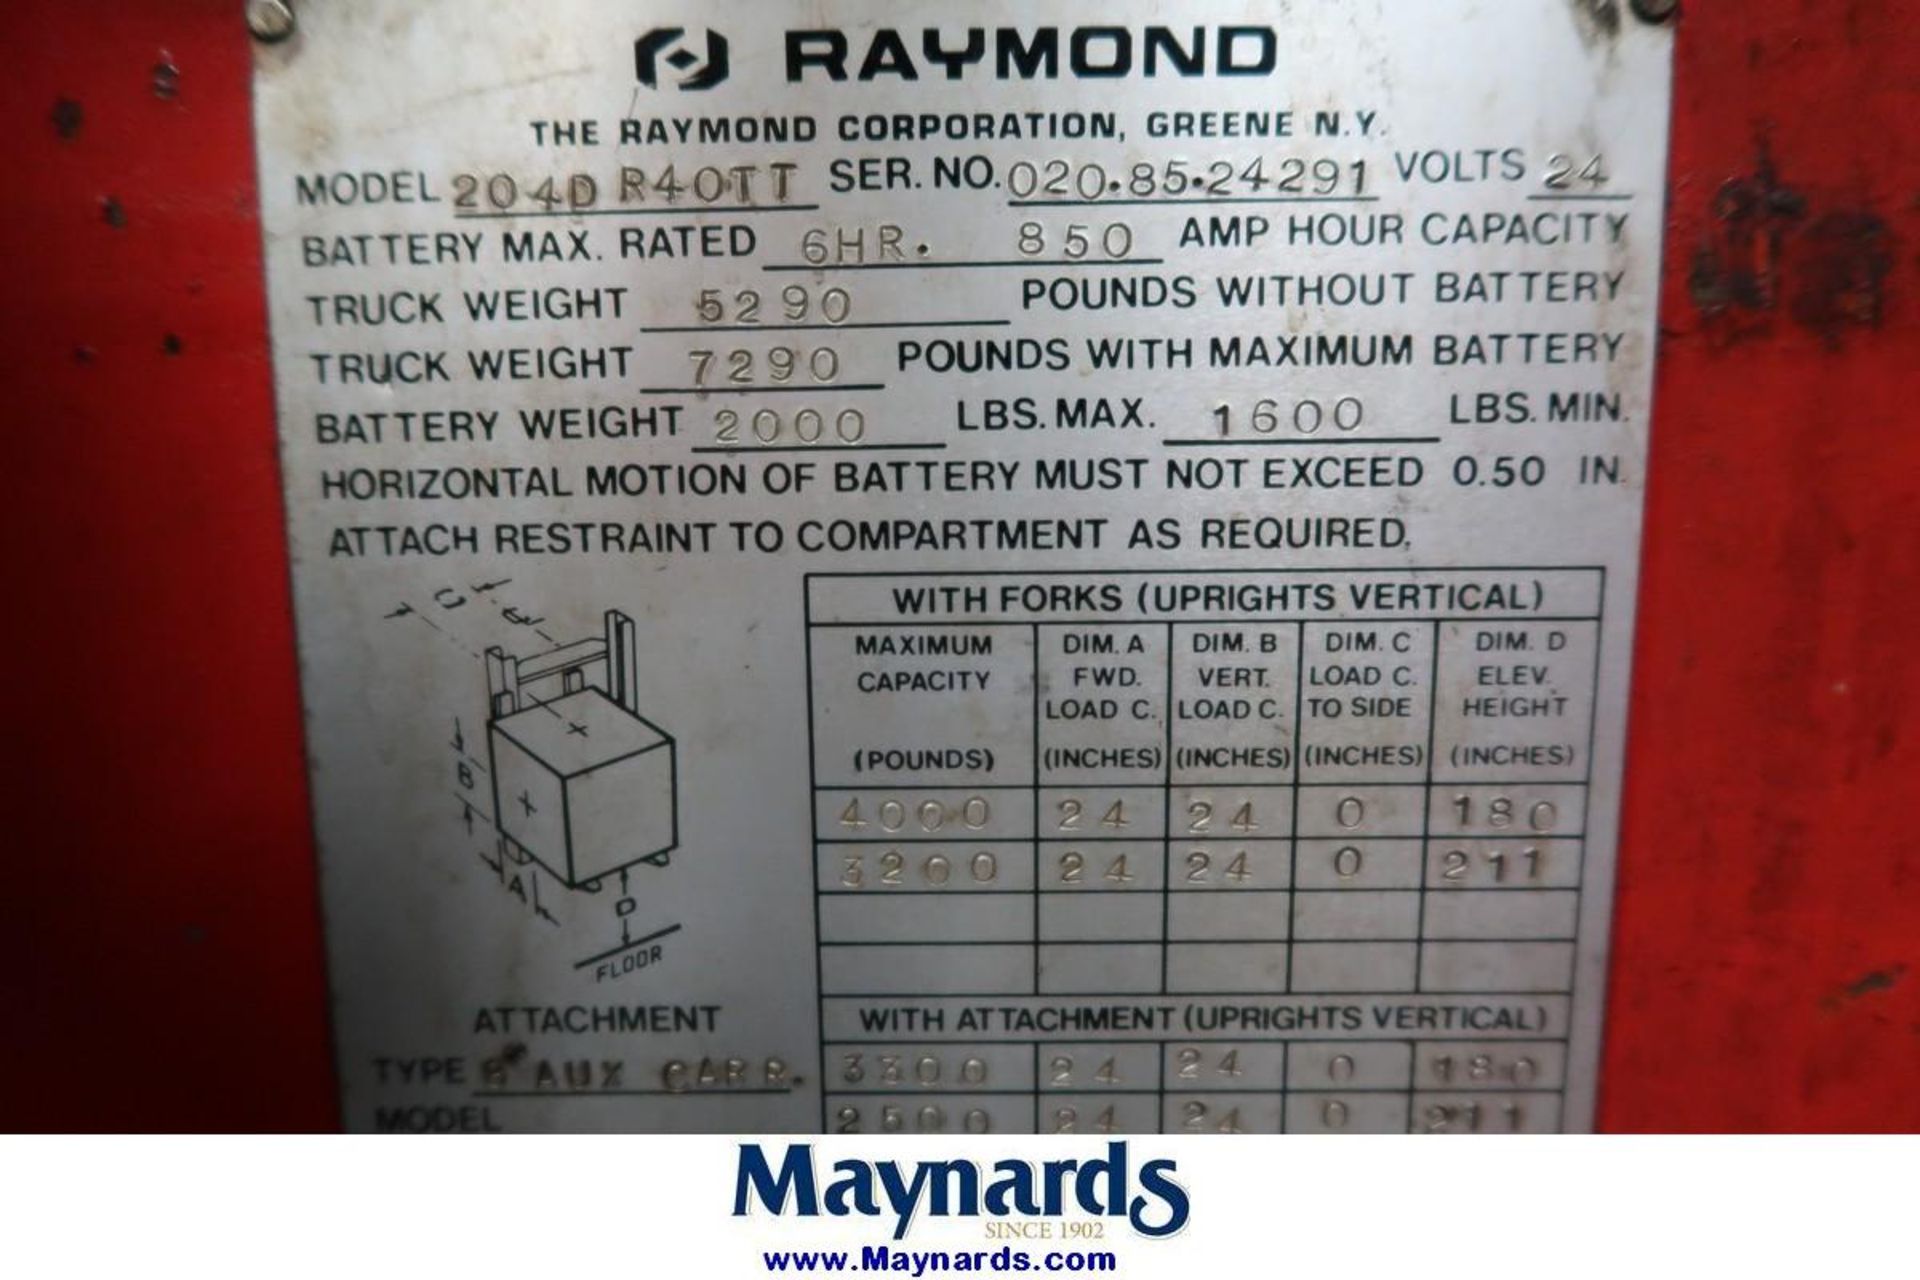 Raymond 20-4DR40TT 24V Electric Stand-Up Forklift - Image 11 of 11